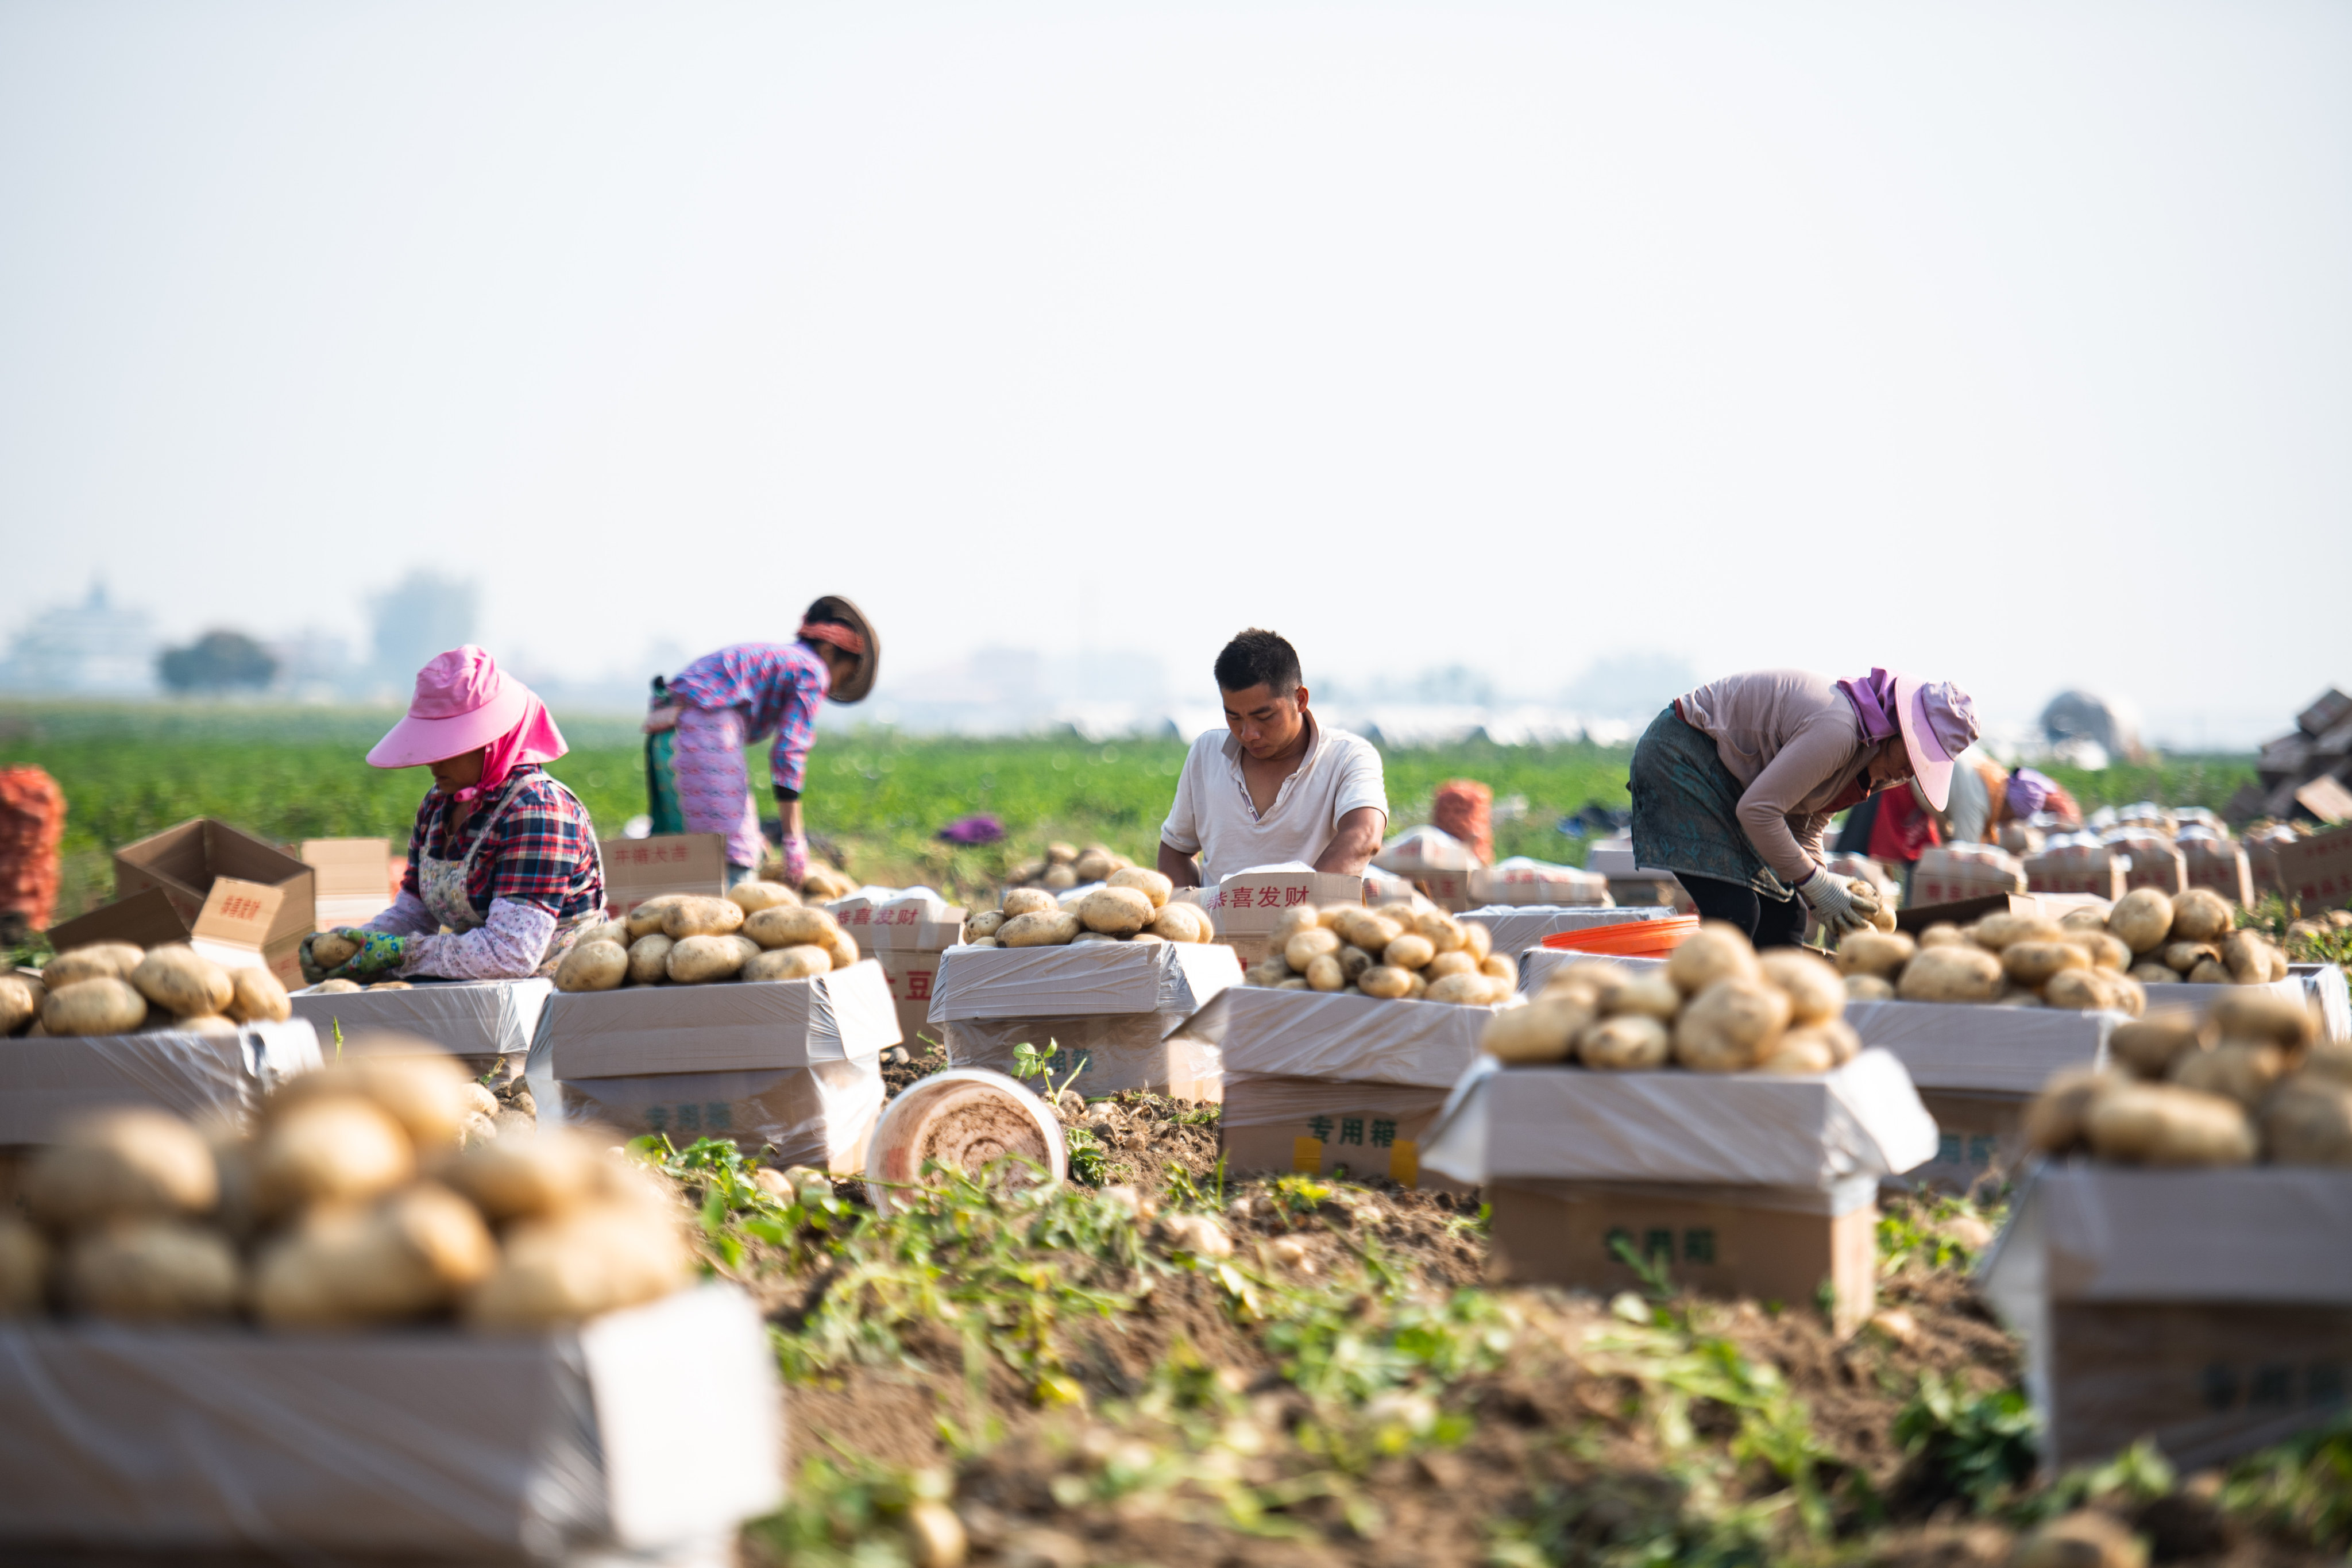 Farmers sort out freshly harvested potatoes in a field in Fengping in the Chinese province of Yunnan on March 16. In China, land banking has been primarily used by local governments to expropriate rural land that is still being productively used for agriculture. Photo: Xinhua 